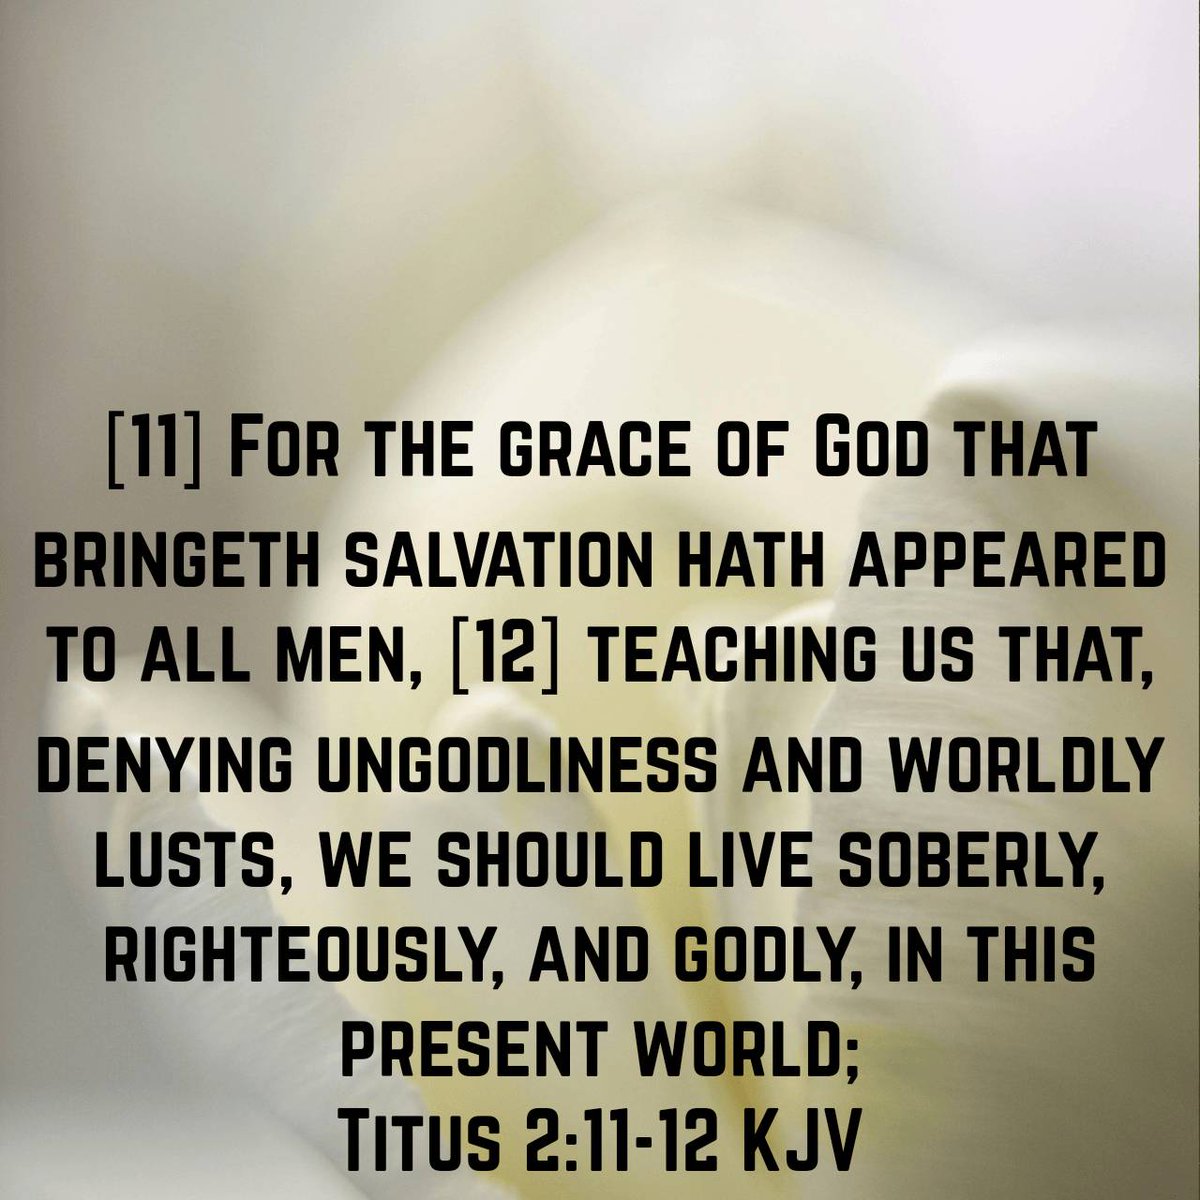 Titus 2:11-12 KJV [11] For the grace of God that bringeth salvation hath appeared to all men, [12] teaching us that, denying ungodliness and worldly lusts, we should live soberly, righteously, and godly, in this present world; bible.com/bible/1/tit.2.…